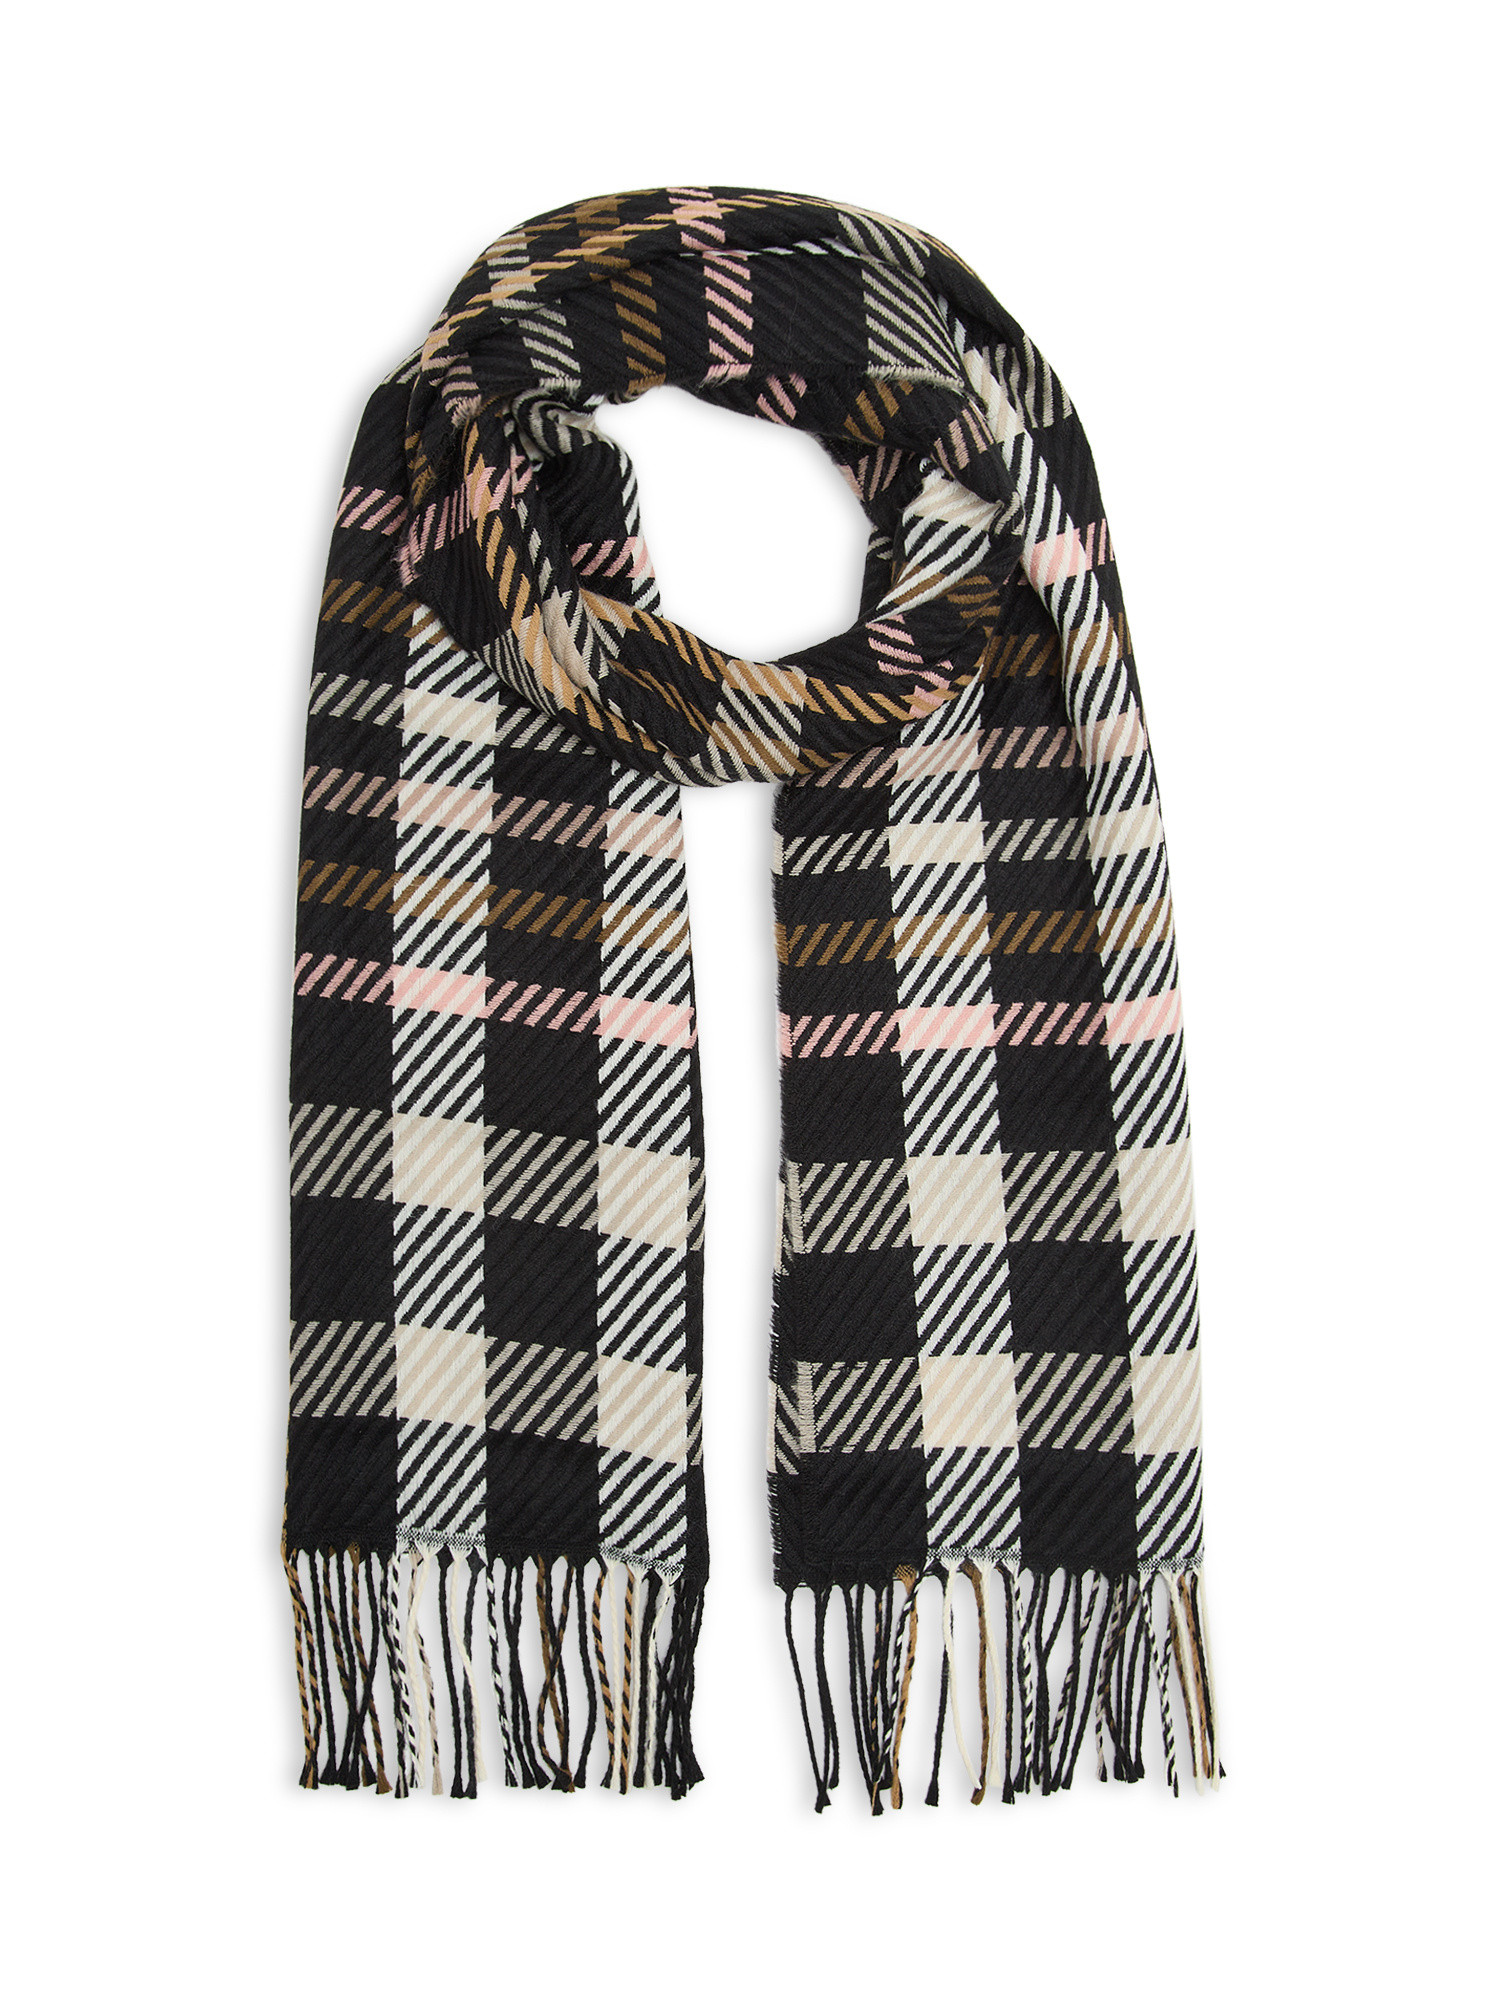 Koan - Plaid and striped stole, Brown, large image number 0